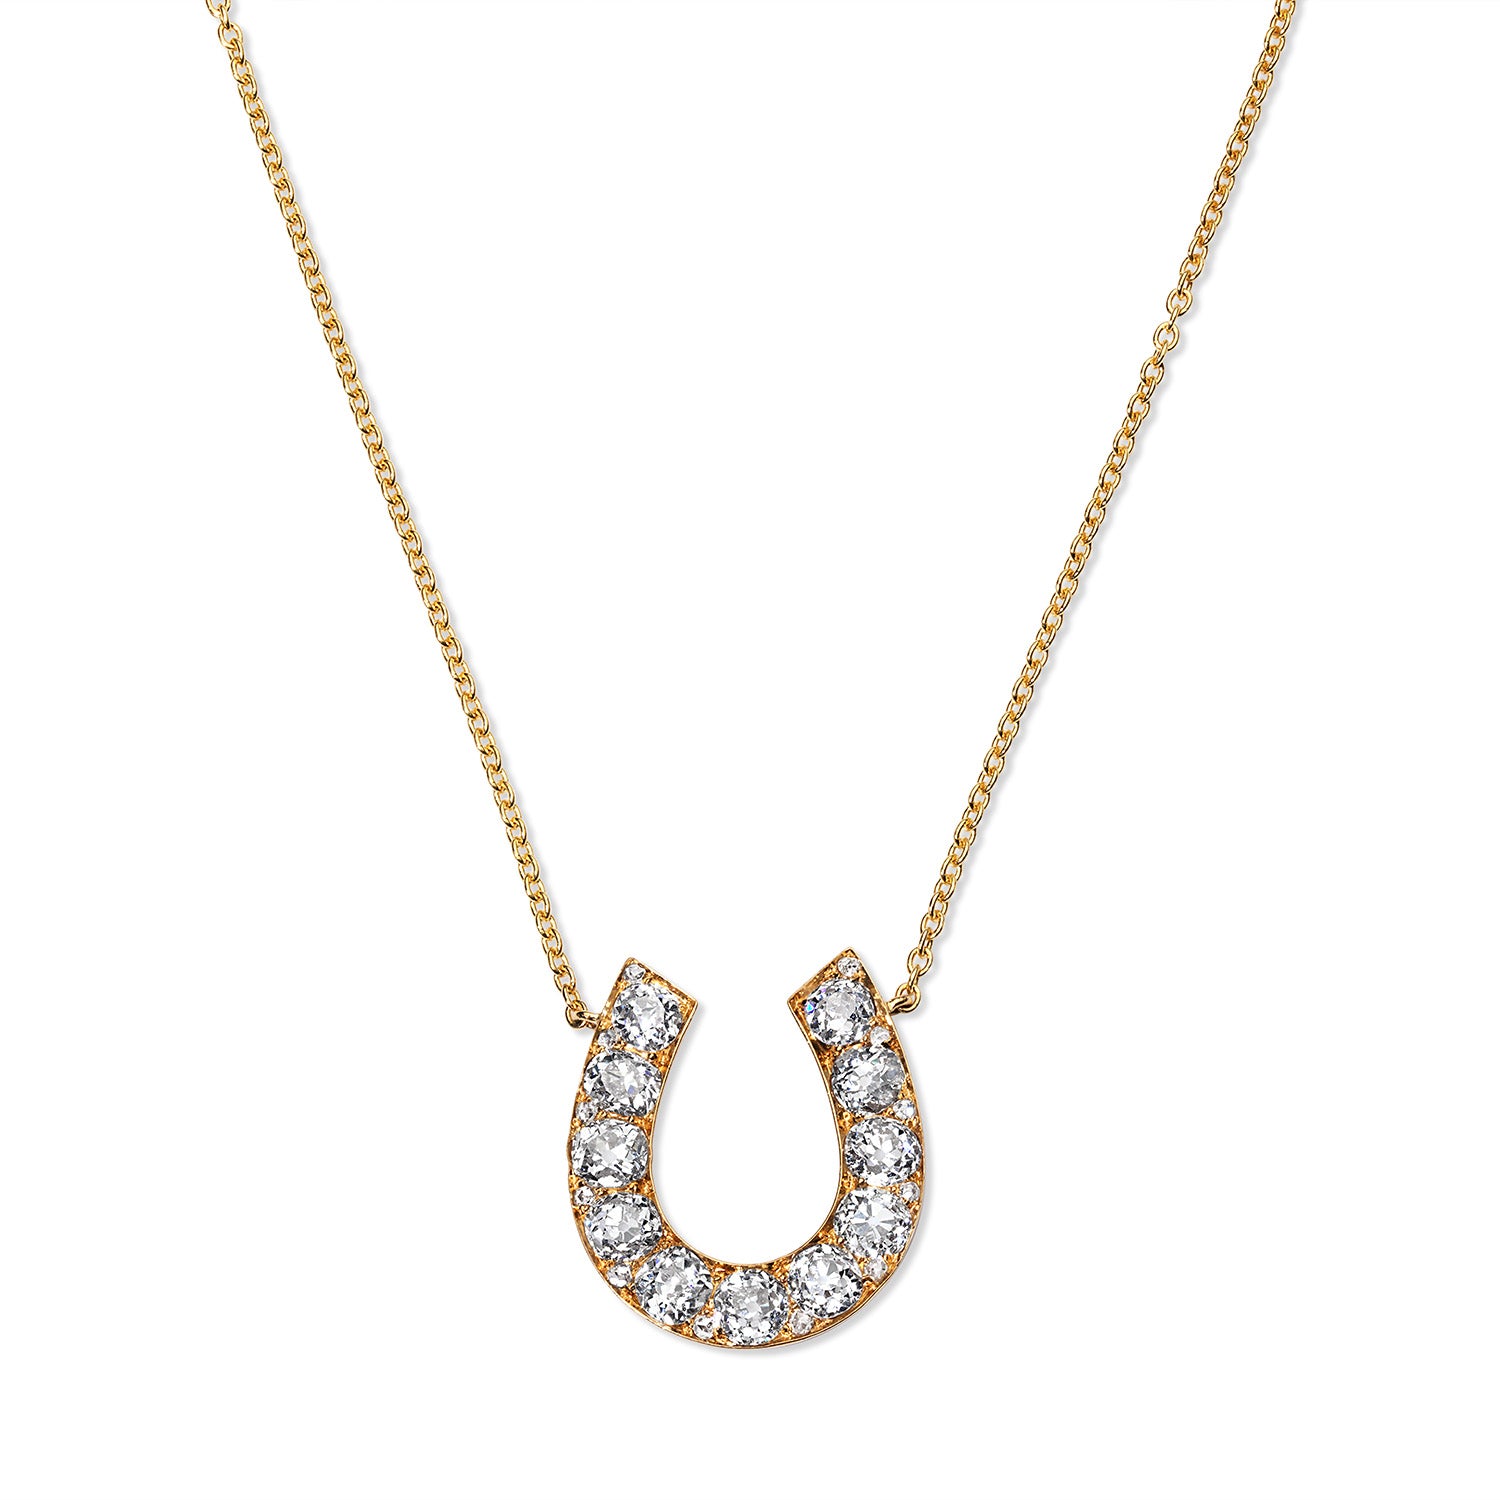 Unique 18 karat yellow gold antique horseshoe pendant, curated by Susan L. Kottemann in New York. Features eleven .25 carat miner cut diamonds, originally a brooch transformed into a stunning pendant, perfect for any collection